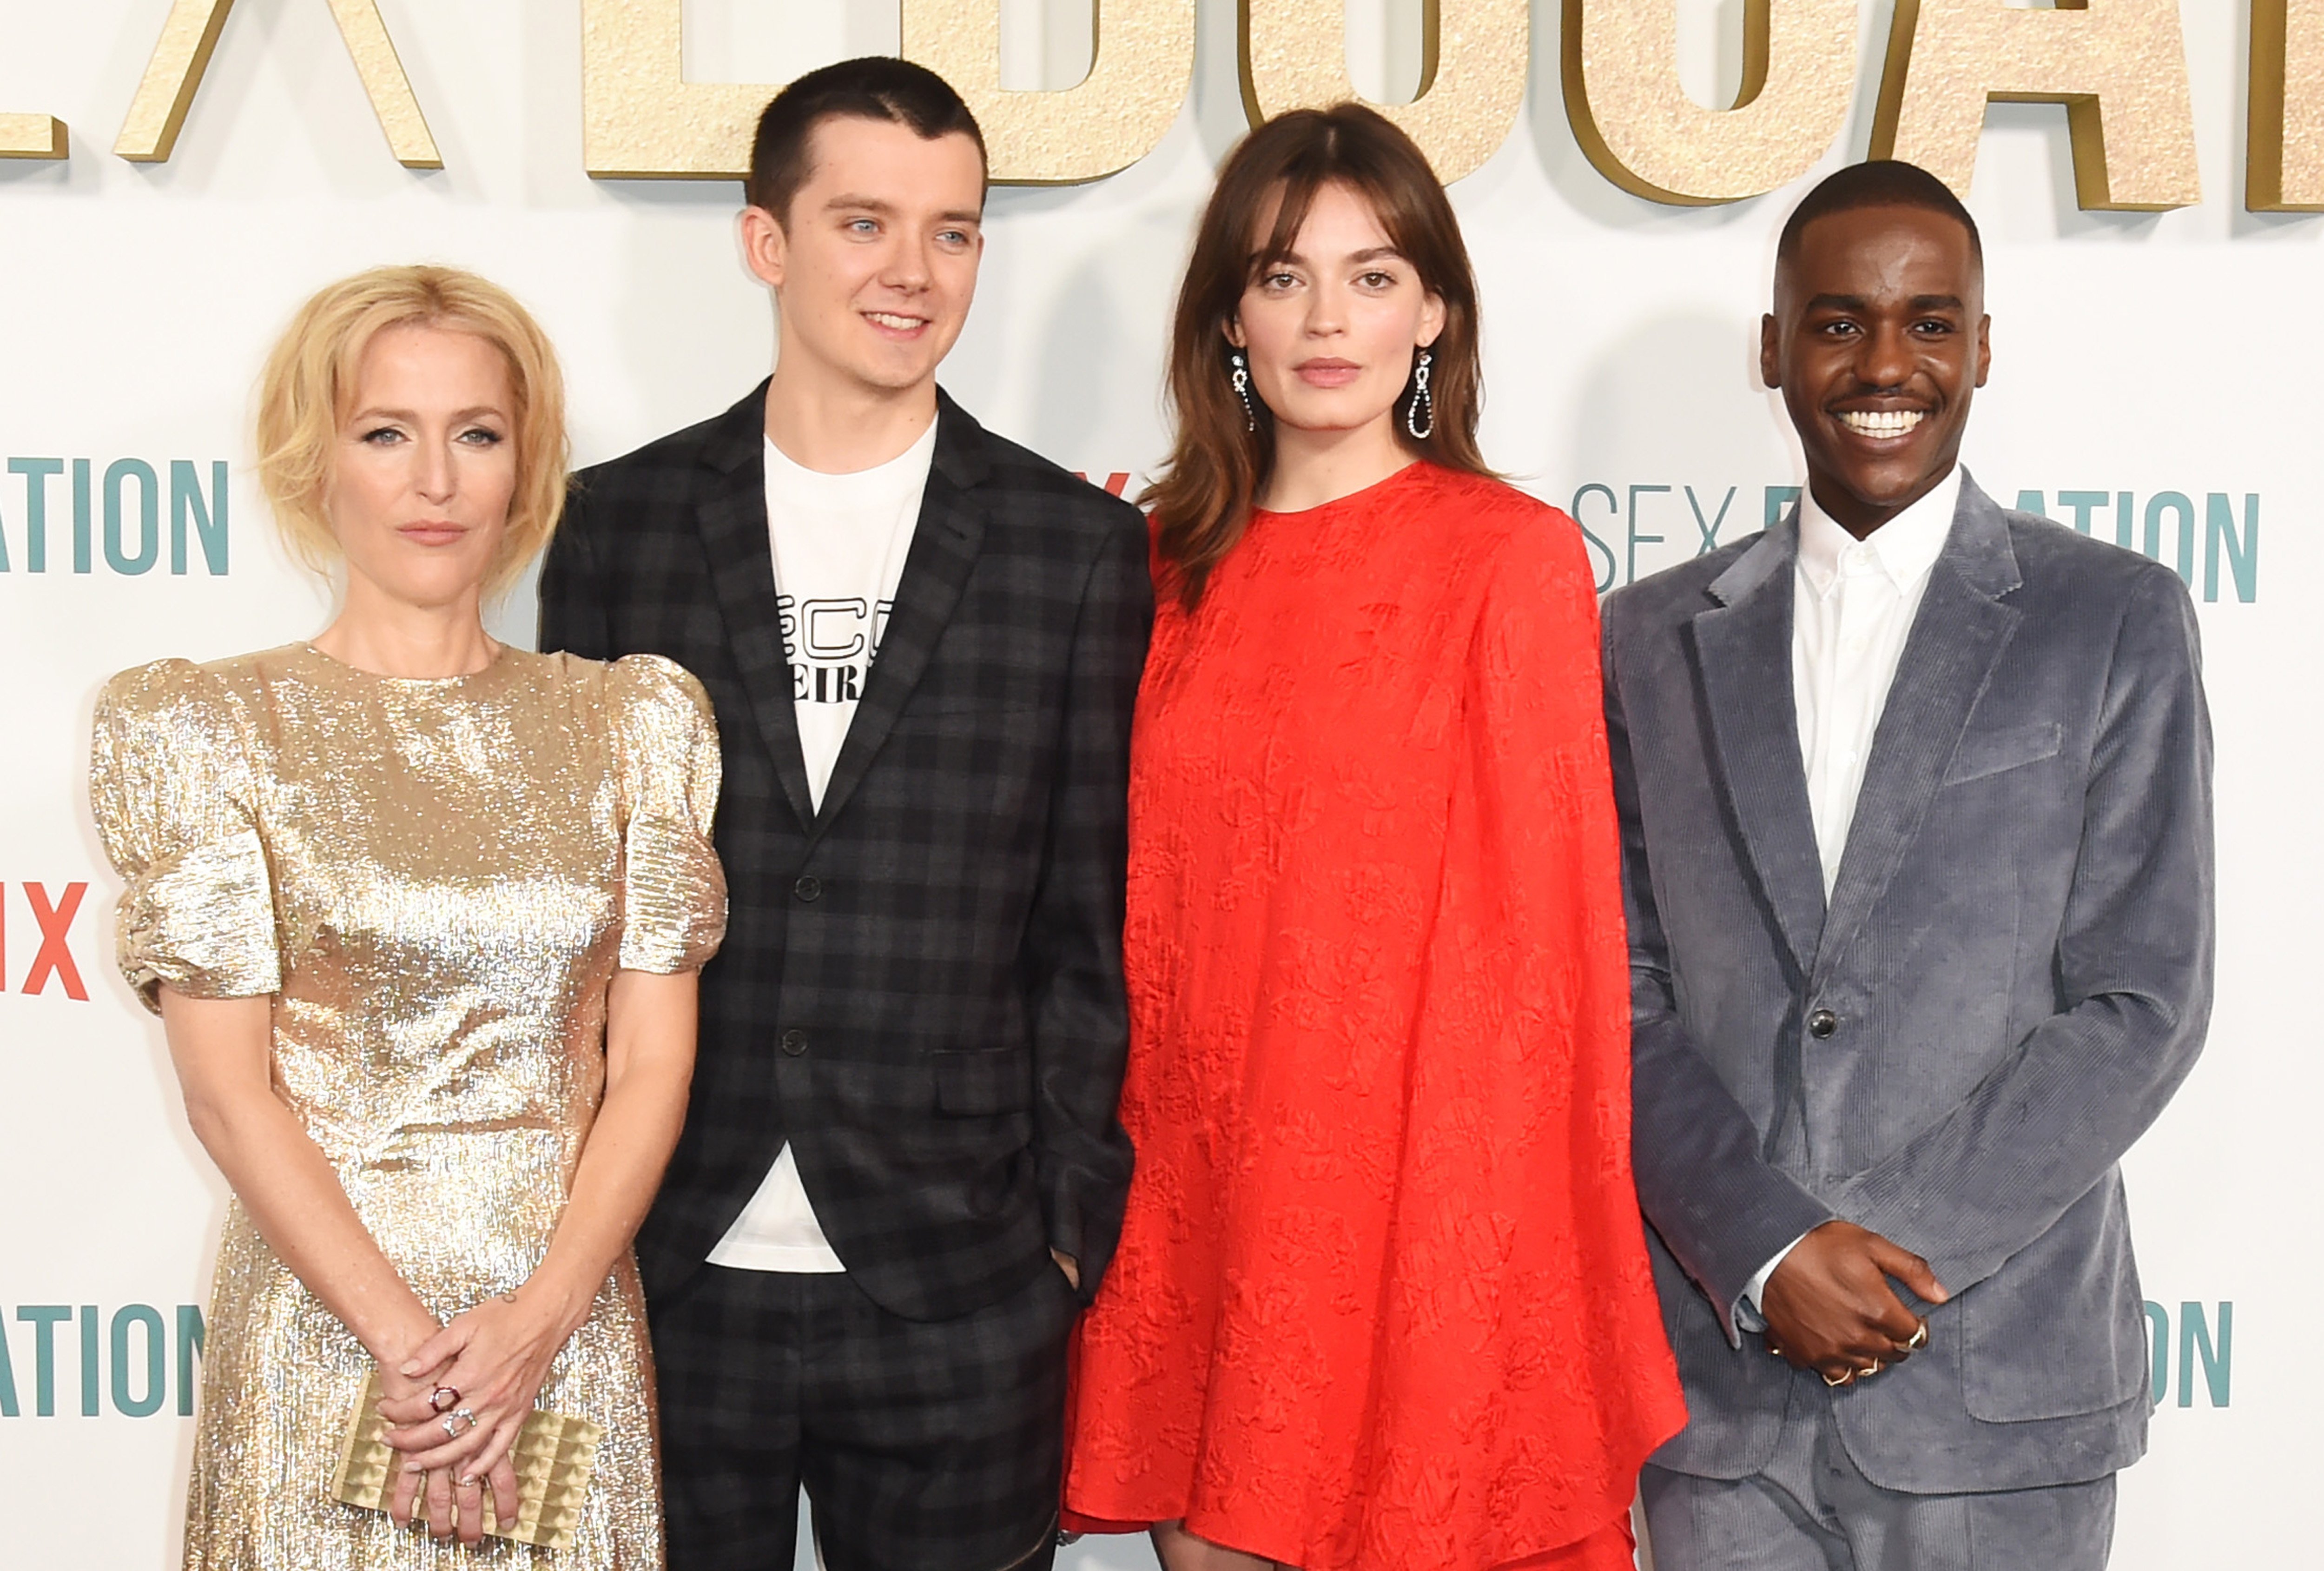 Gillian Anderson, Asa Butterfield, Emma Mackey and Ncuti Gatwa pose for photographers at the premiere of 'Sex Education' Season 2